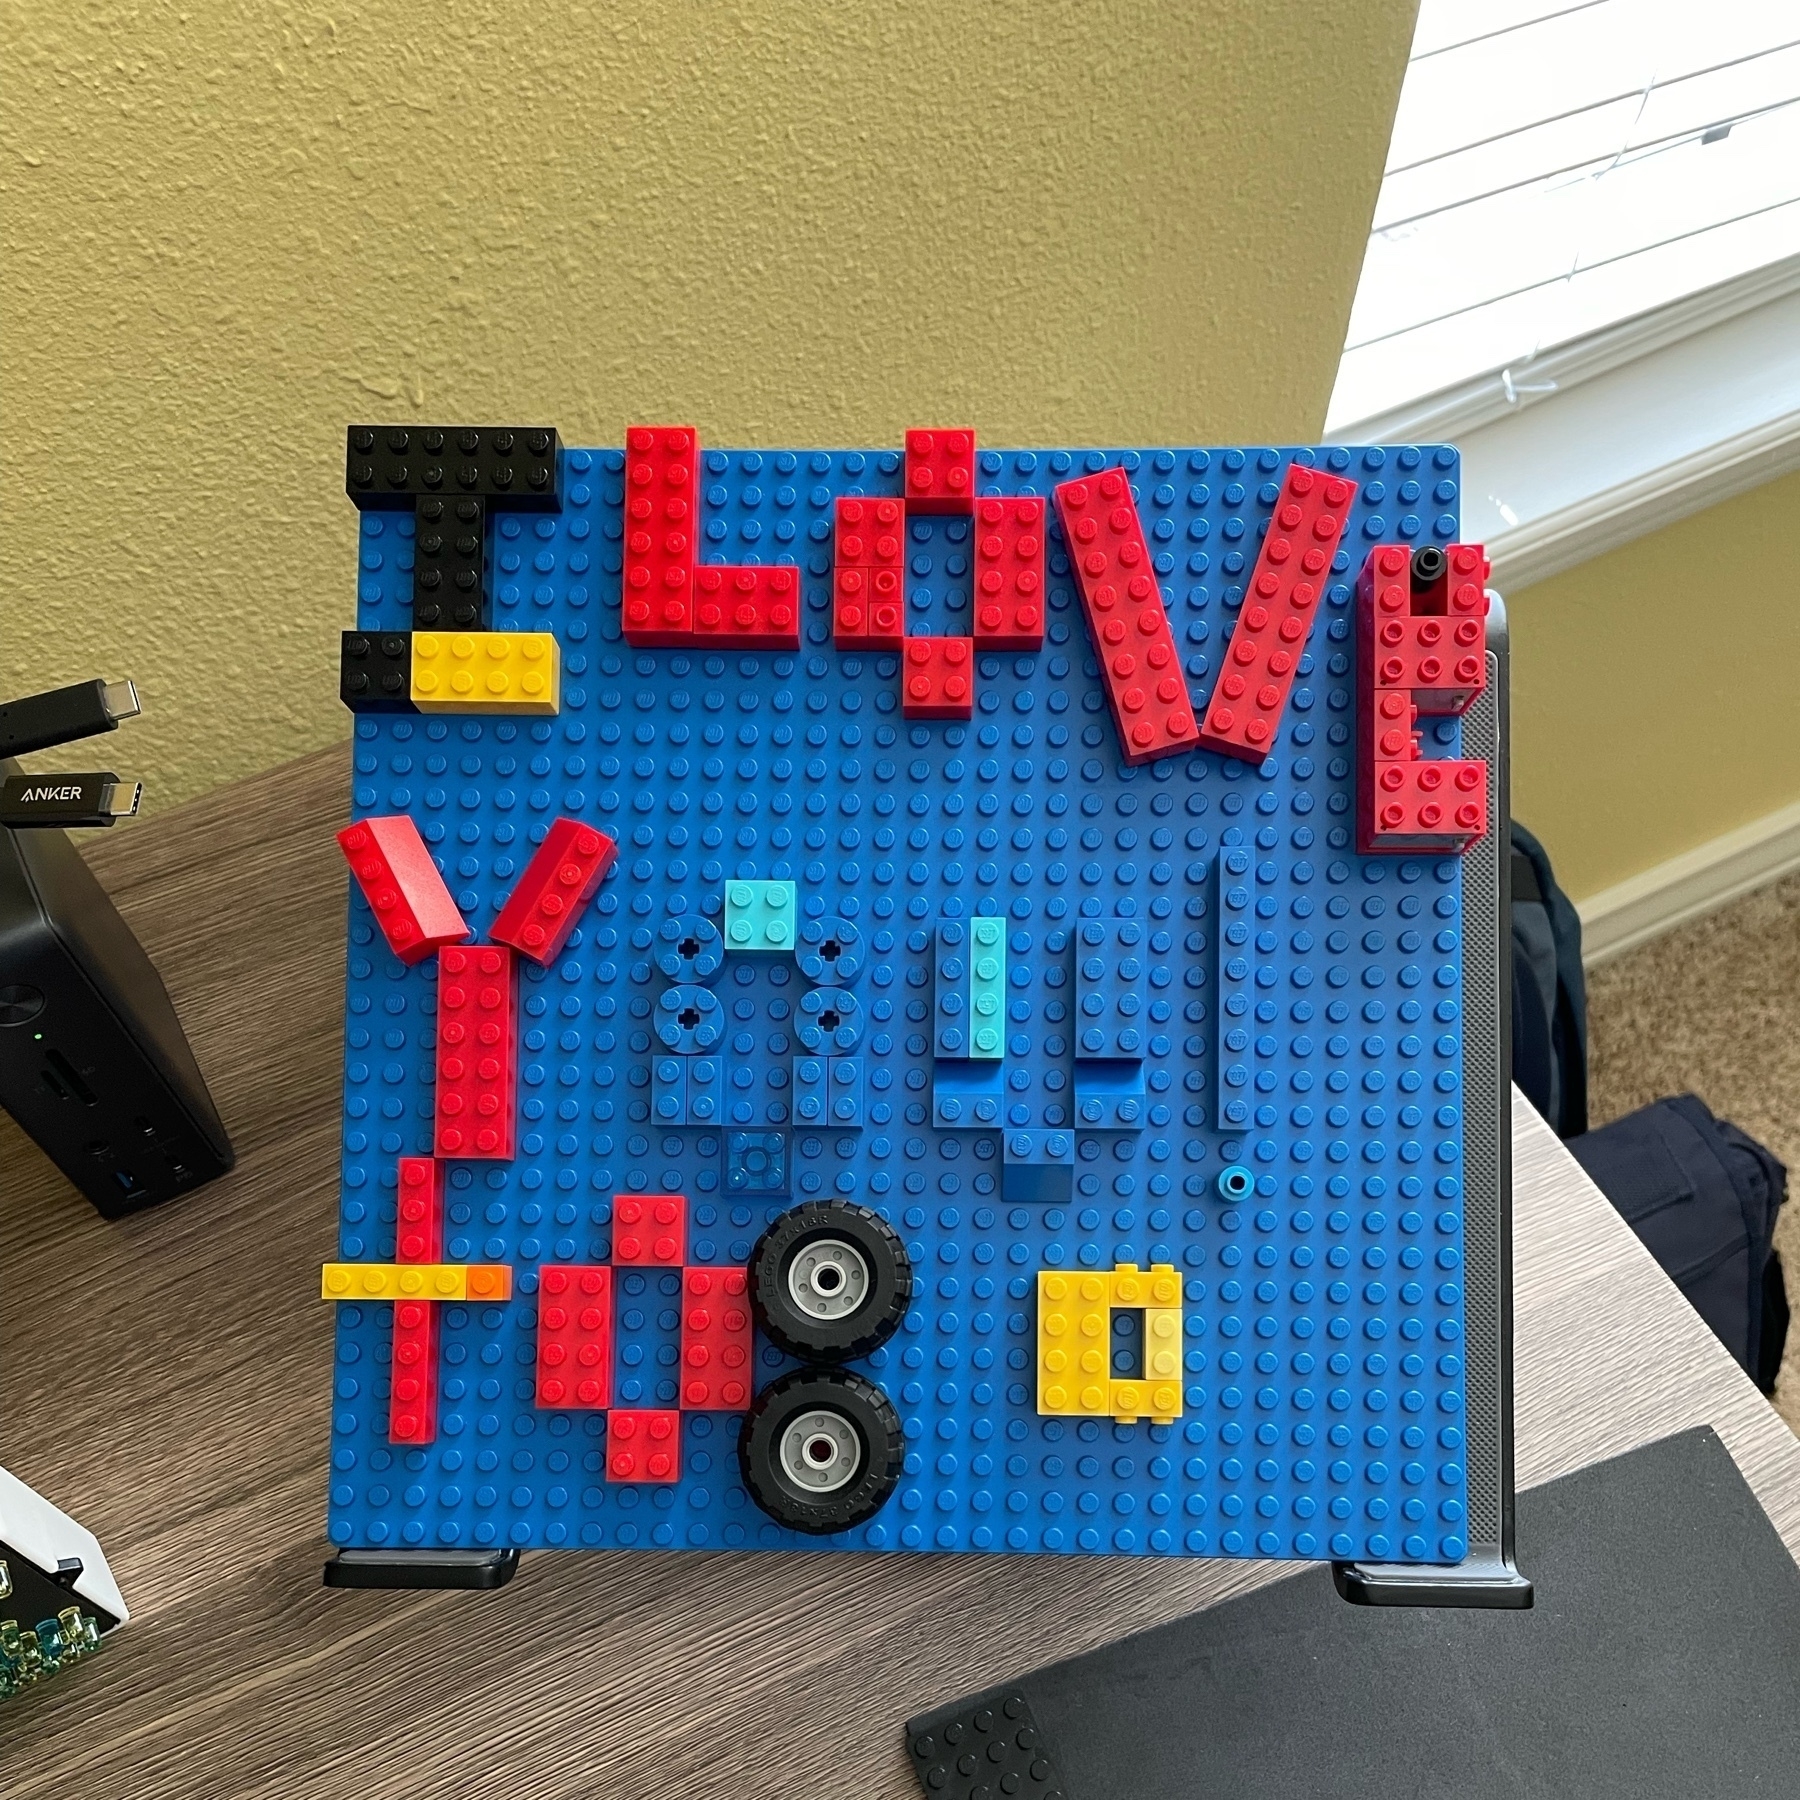 I love you too, written in LEGOs